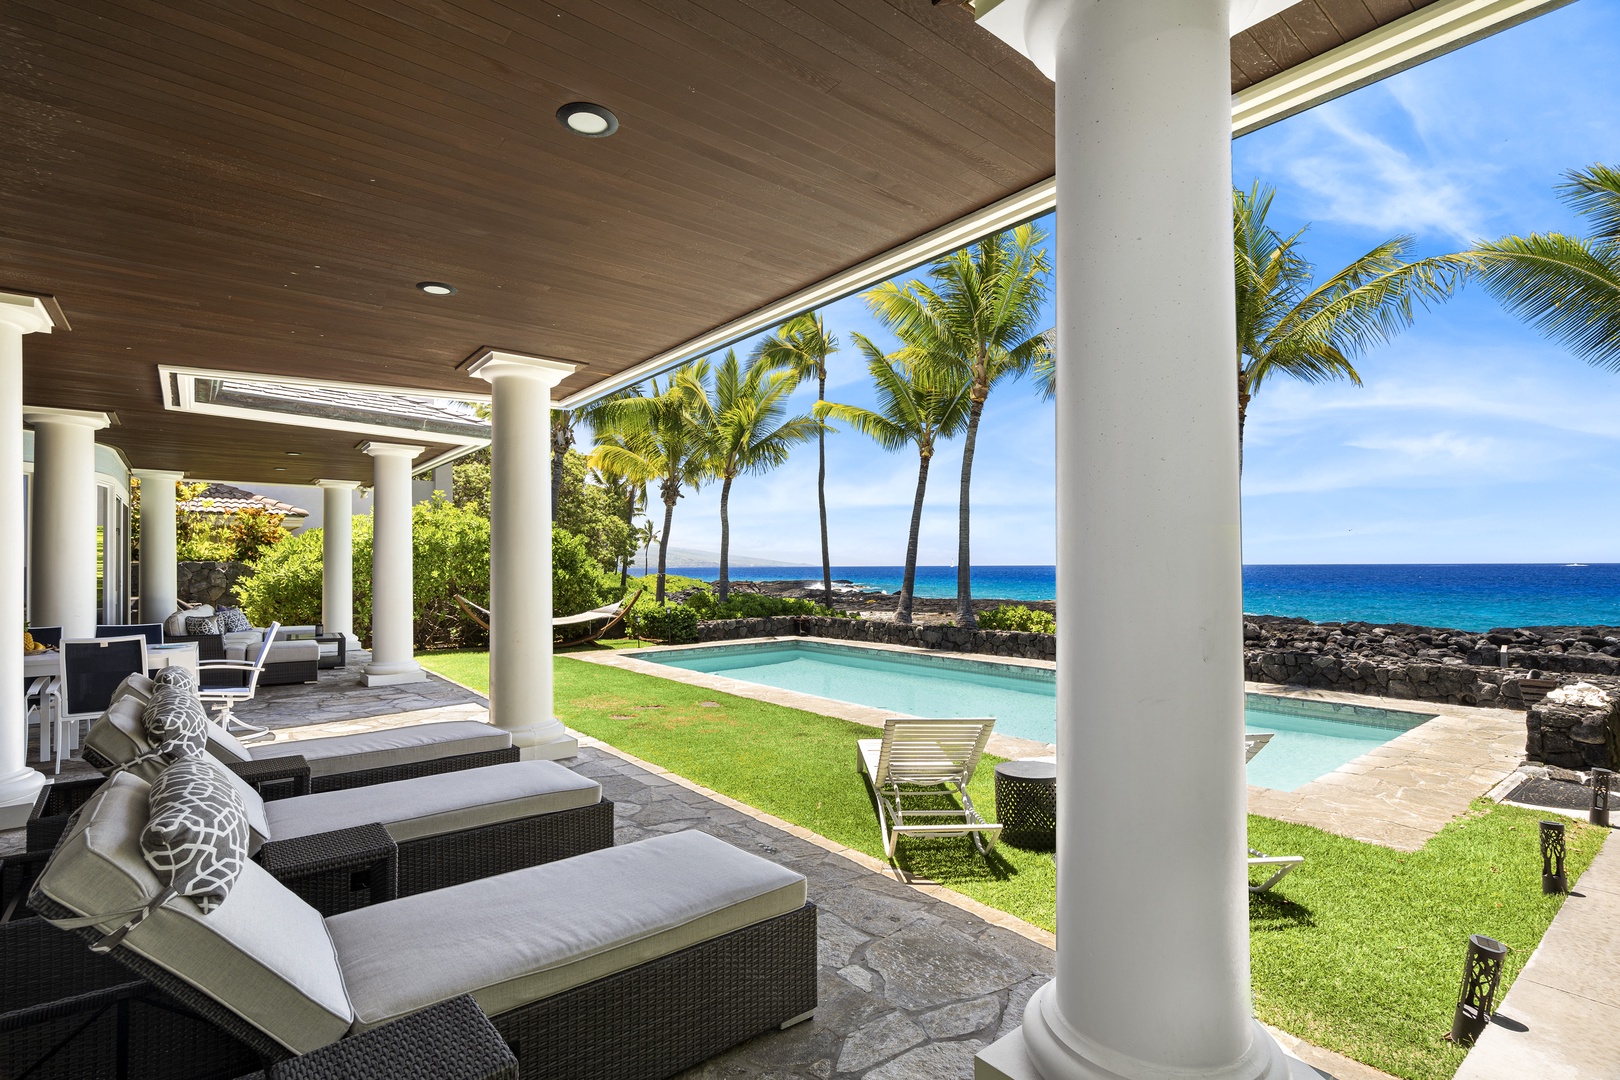 Kailua Kona Vacation Rentals, Kona Blue - Additional loungers for that afternoon nap you've been longing for